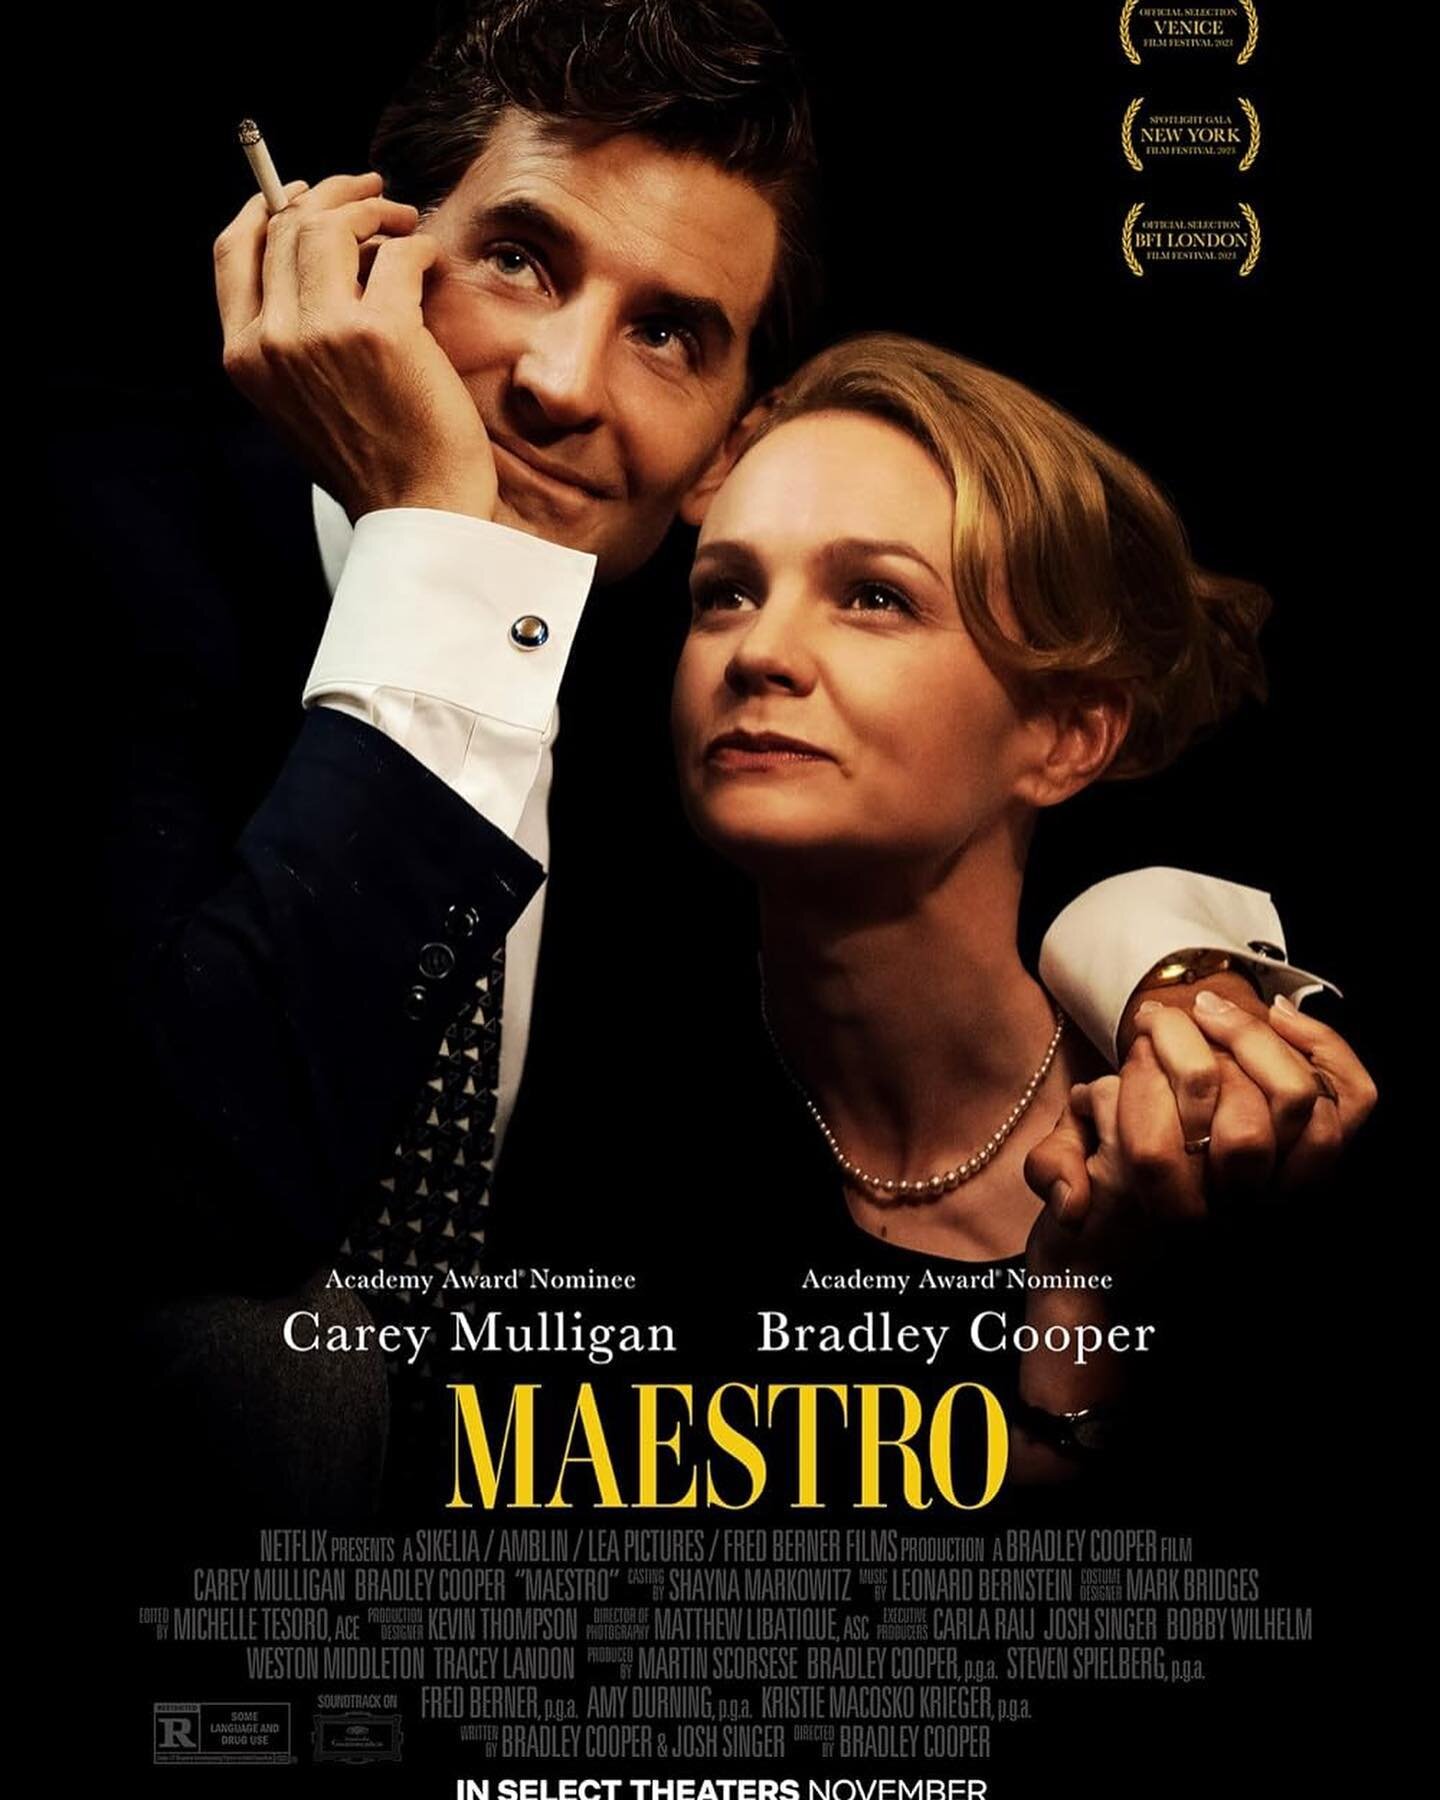 Maestro is streaming on Netflix! @nicholaibaxter served as a music producer and was supported by @pjmcfry, @noahvhubbell, @theawithouttheh, and @_maxiabraham to create the final music mix. @pjmcfry also mixed the Atmos soundtrack for this film!